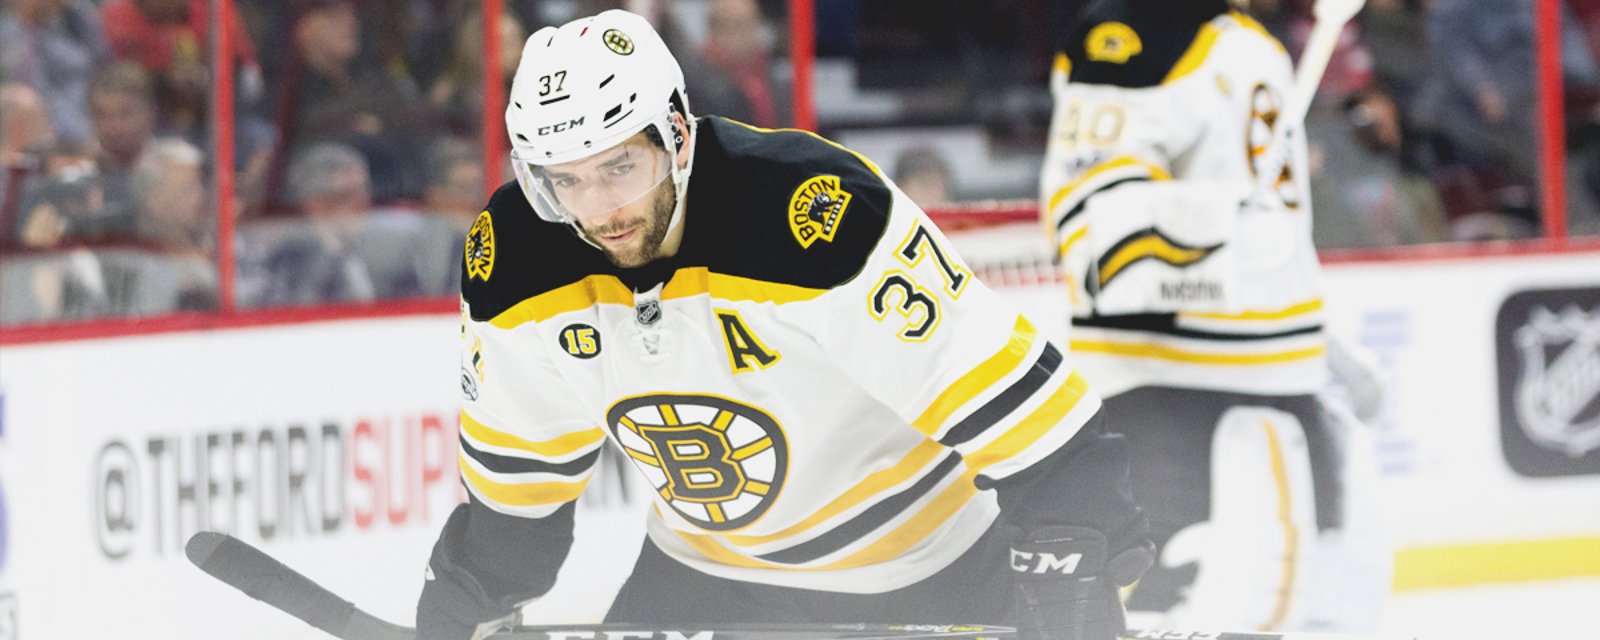 Must see: Bergeron spins and beats Anderson